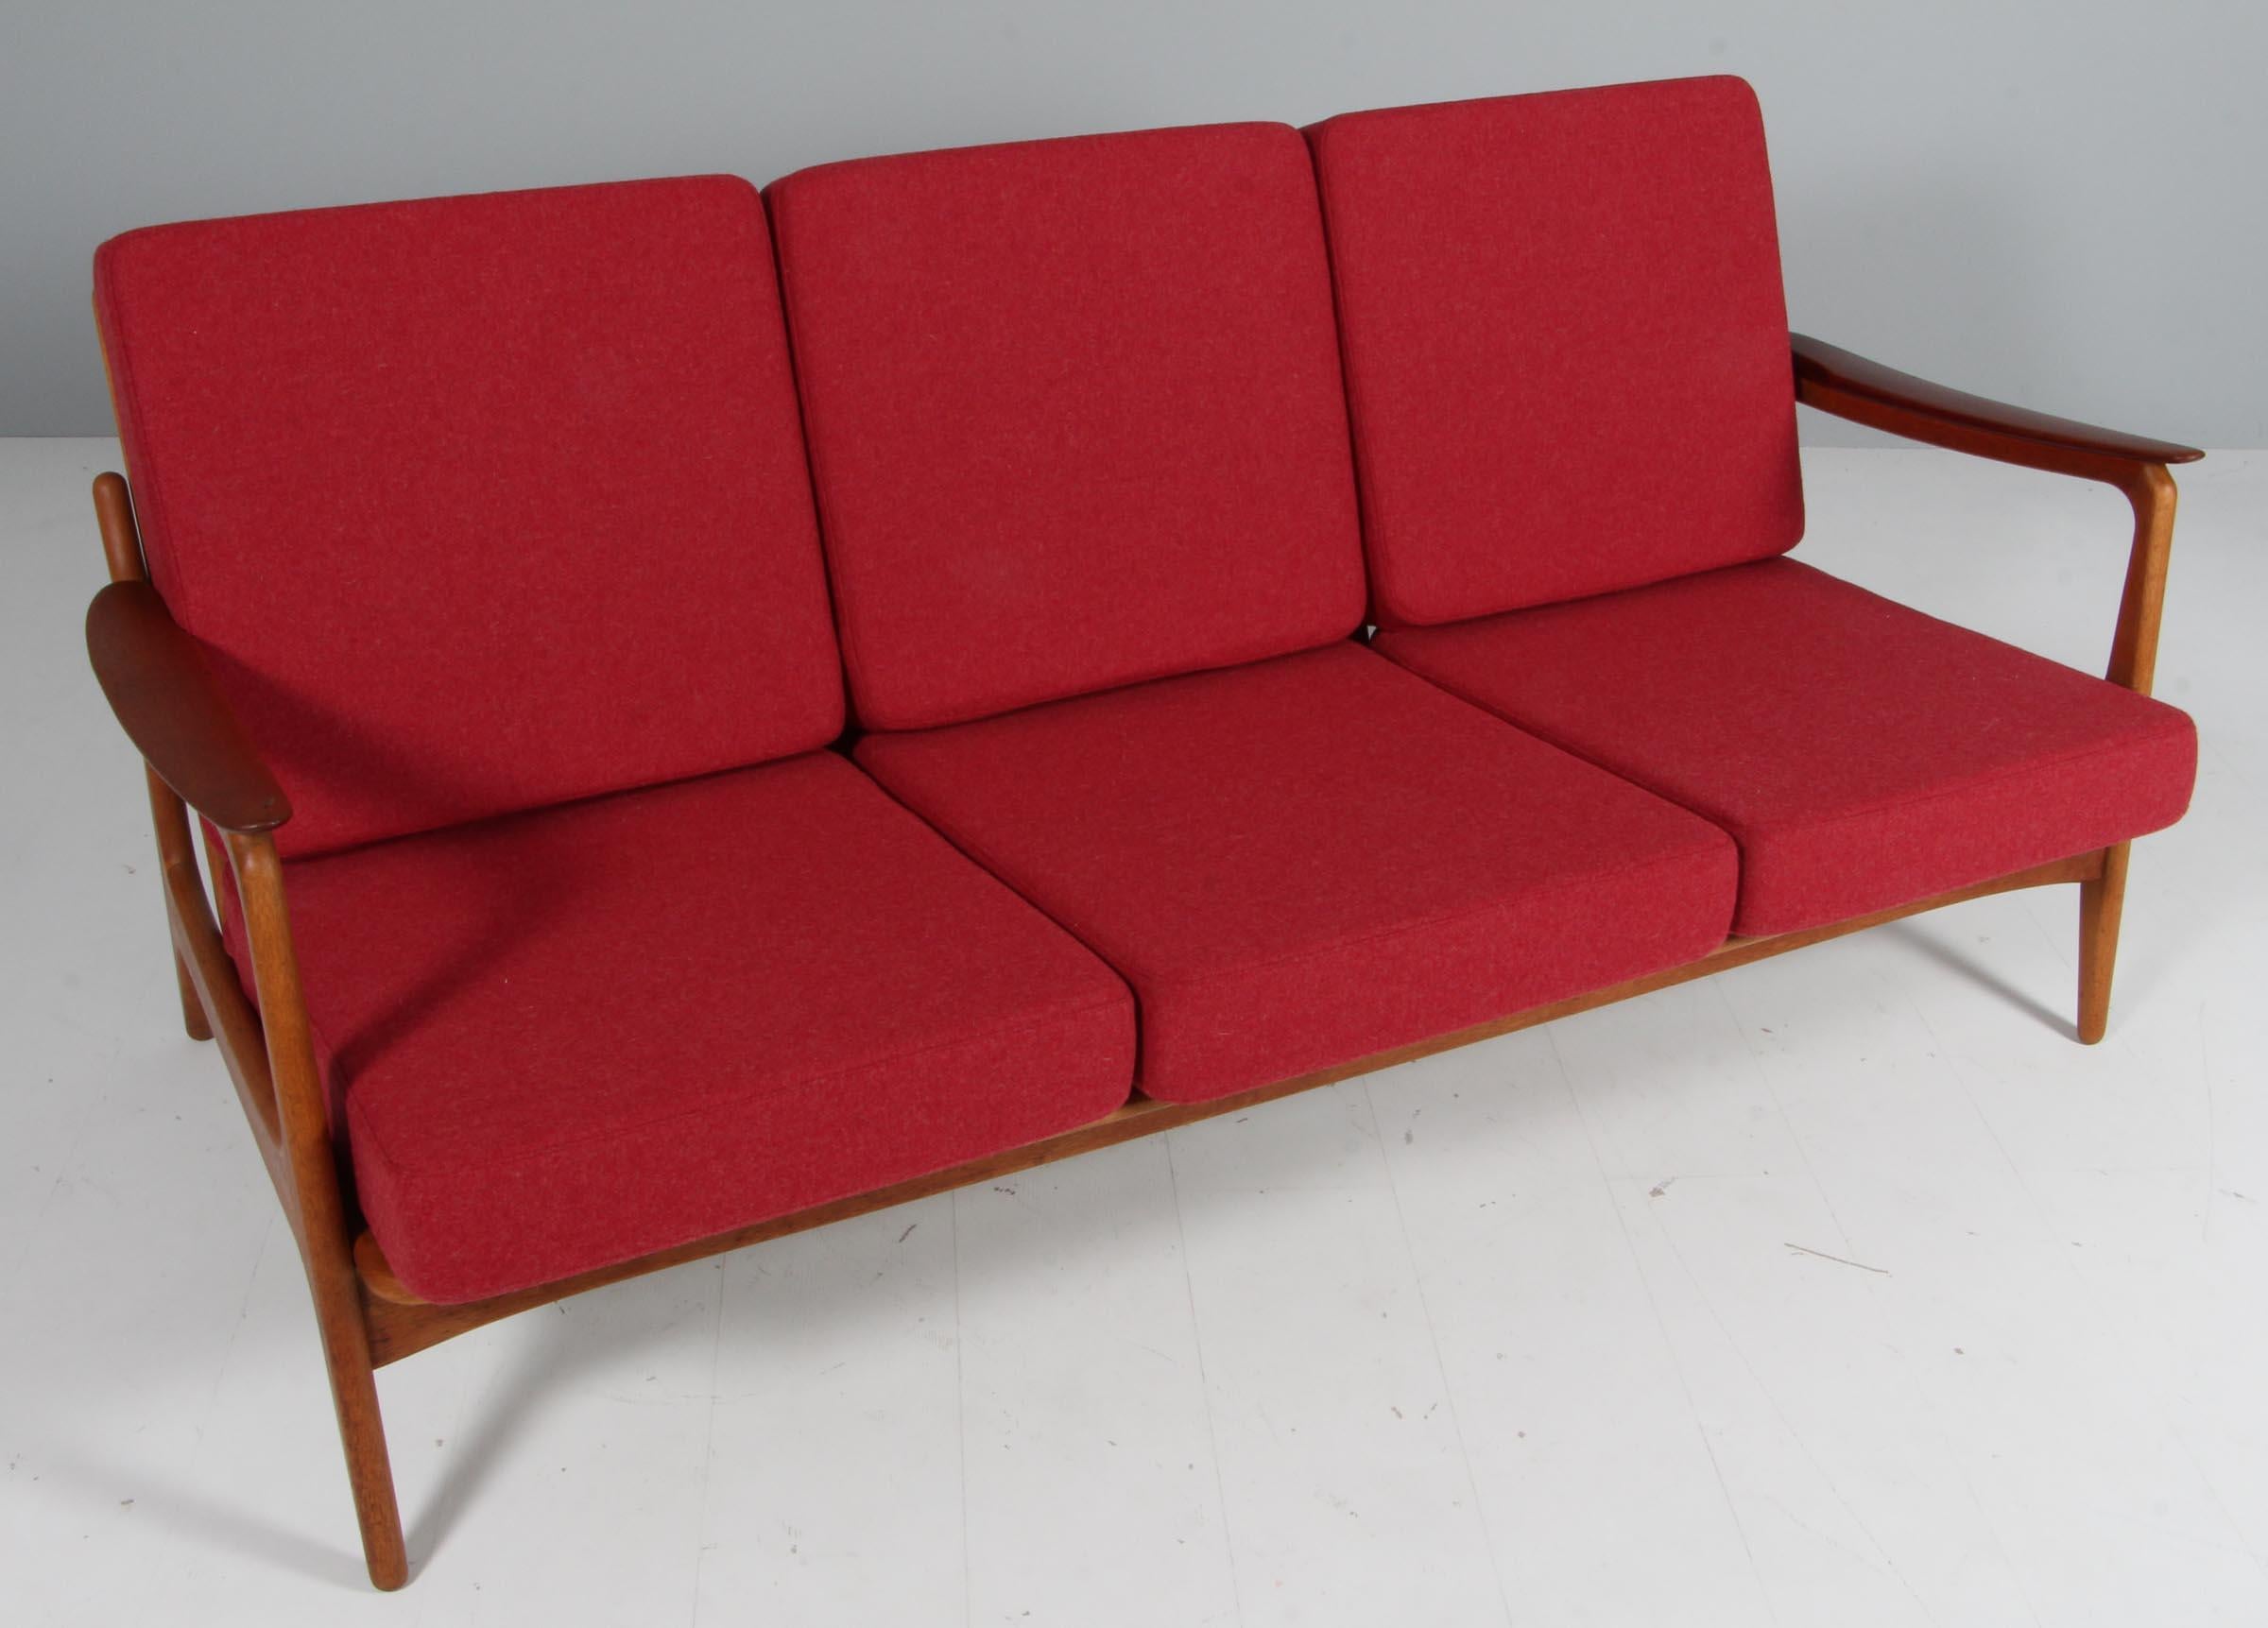 Johannes Andersen three seat sofa with frame of oak and armrests of teak.

New upholstered with red 100% New Zealand wool.

Made by Vamo.